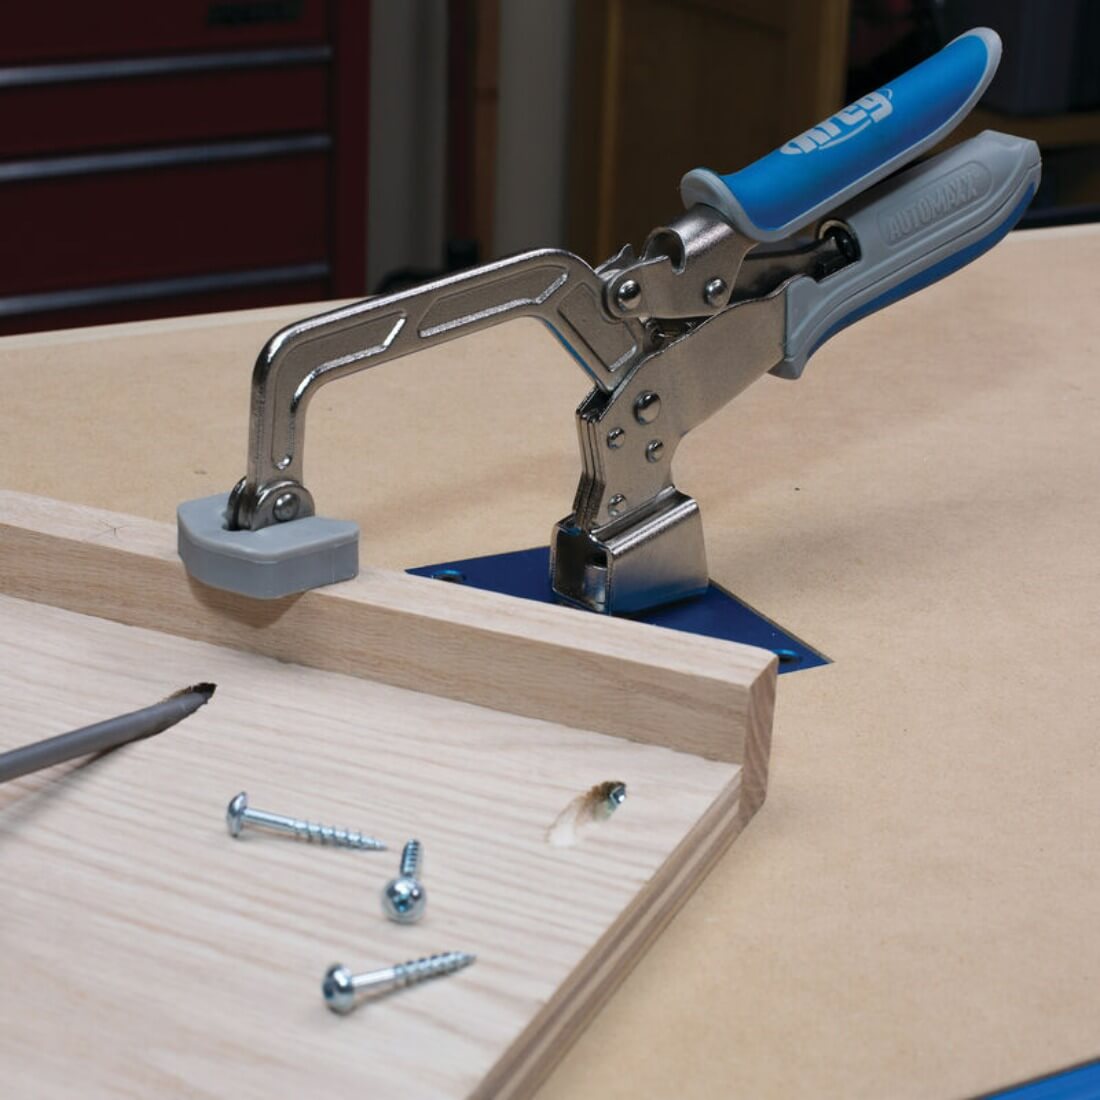 Kreg Automaxx 3 inch Bench Clamp being used to hold down a wooden frame